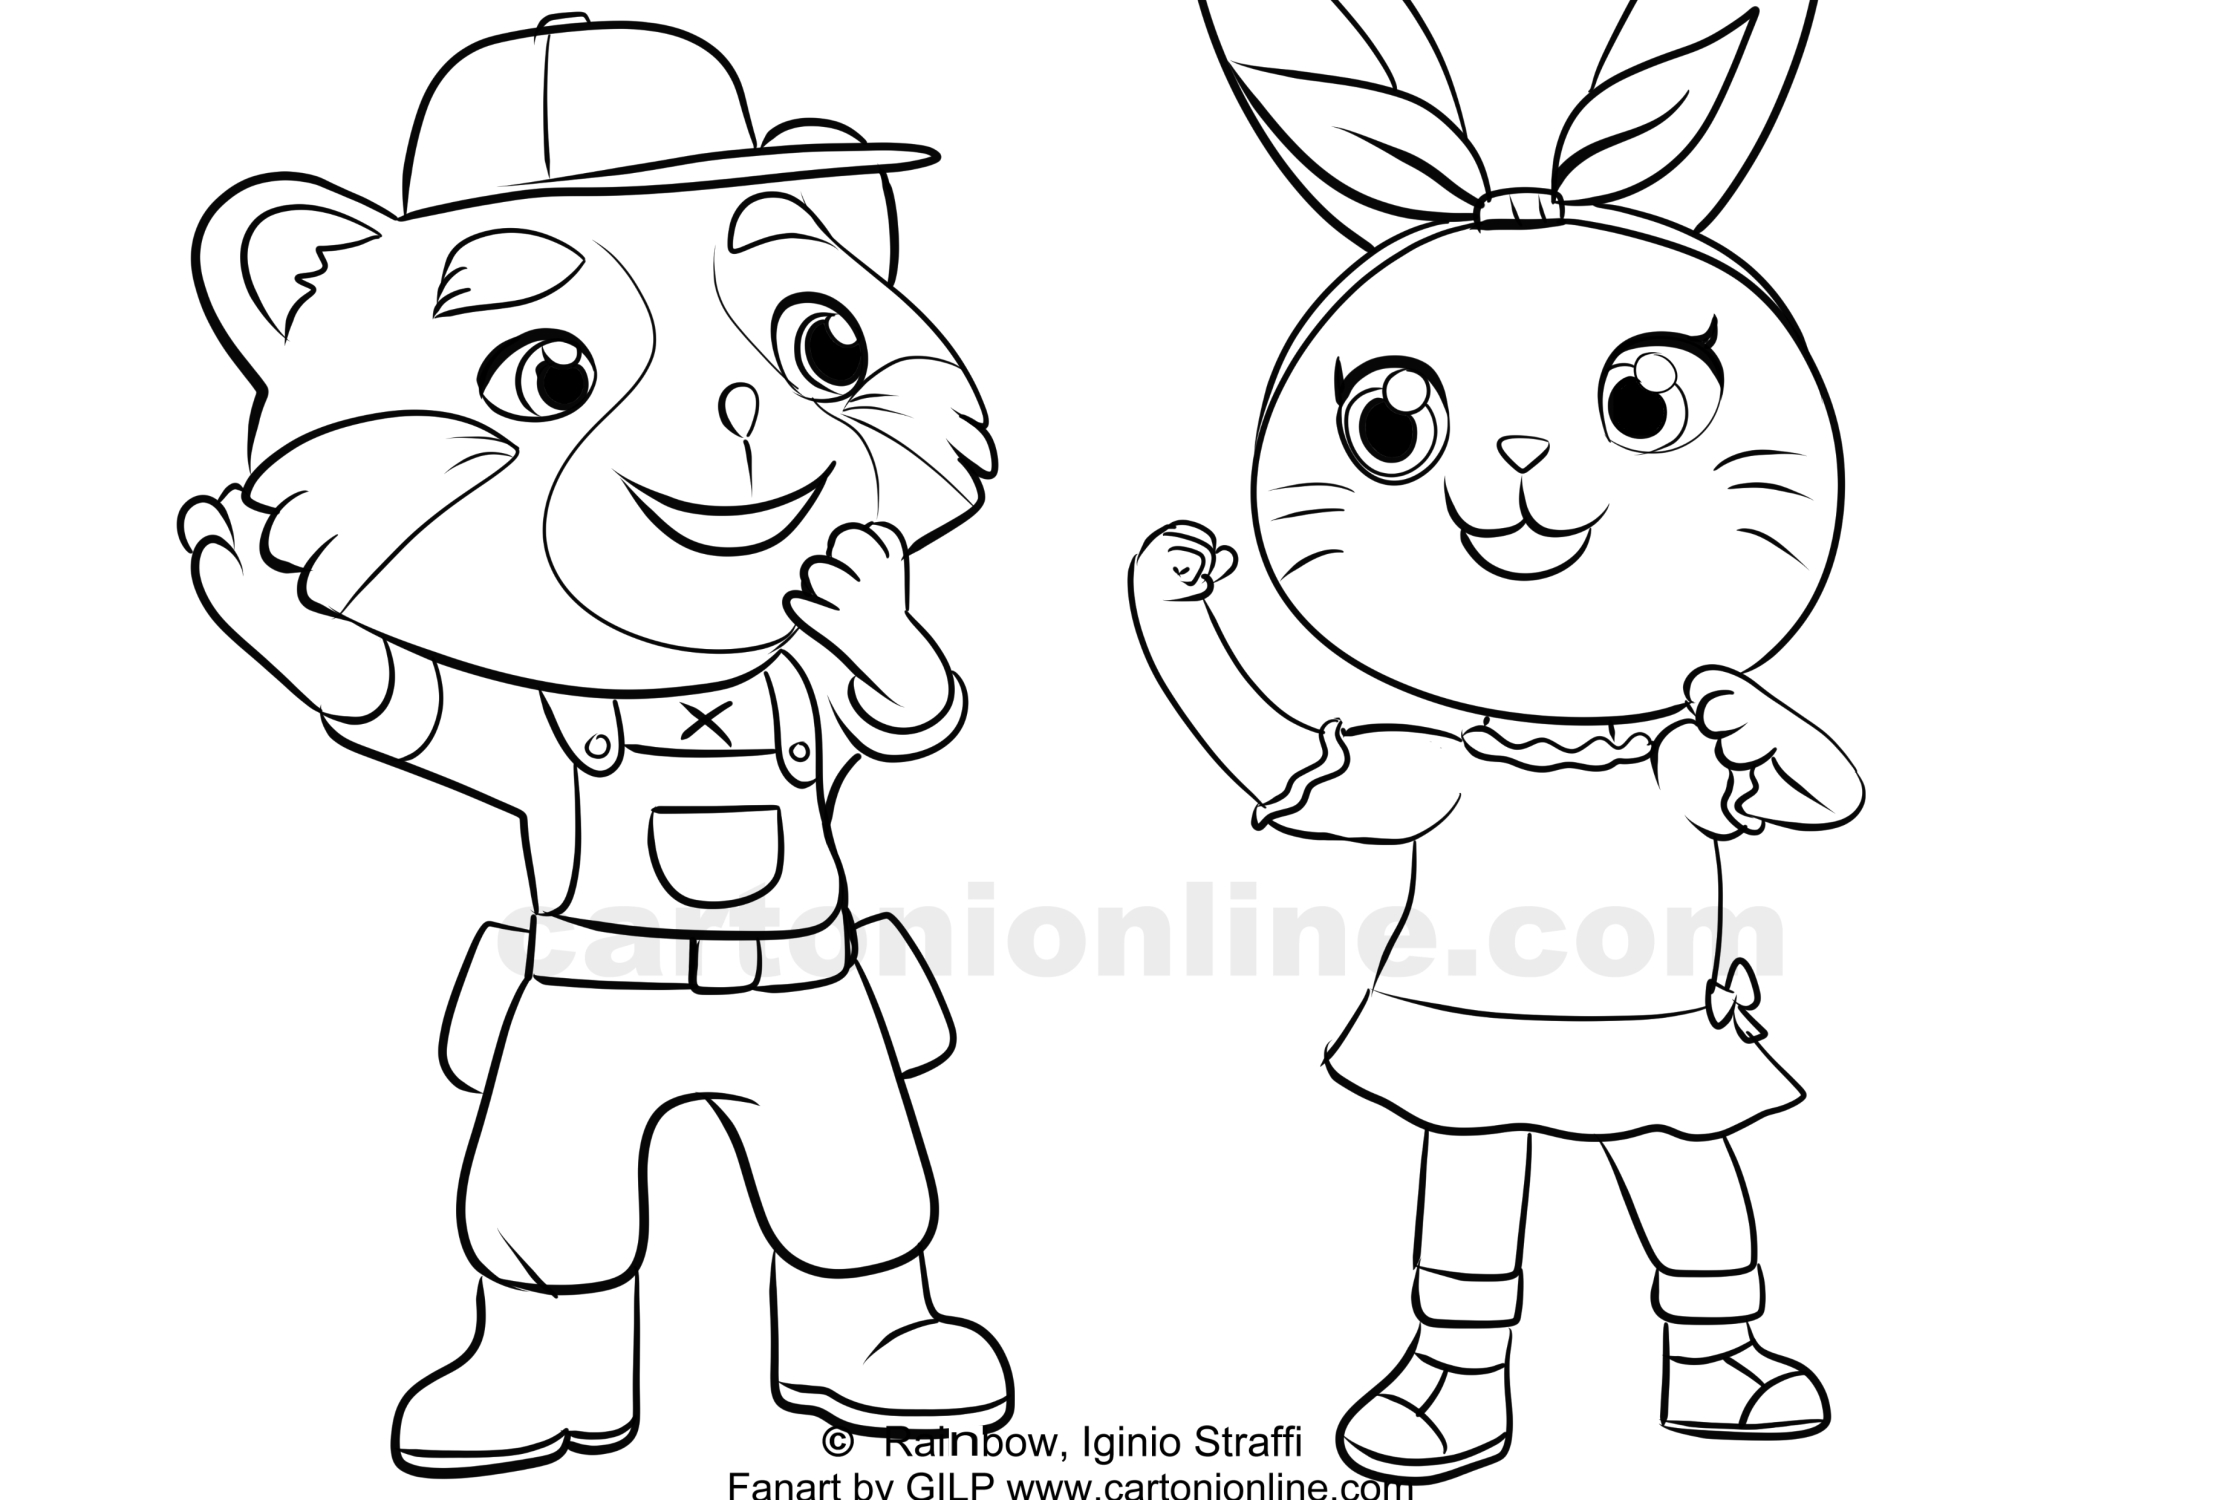 Summer & Todd from Summer & Todd coloring page to print and color